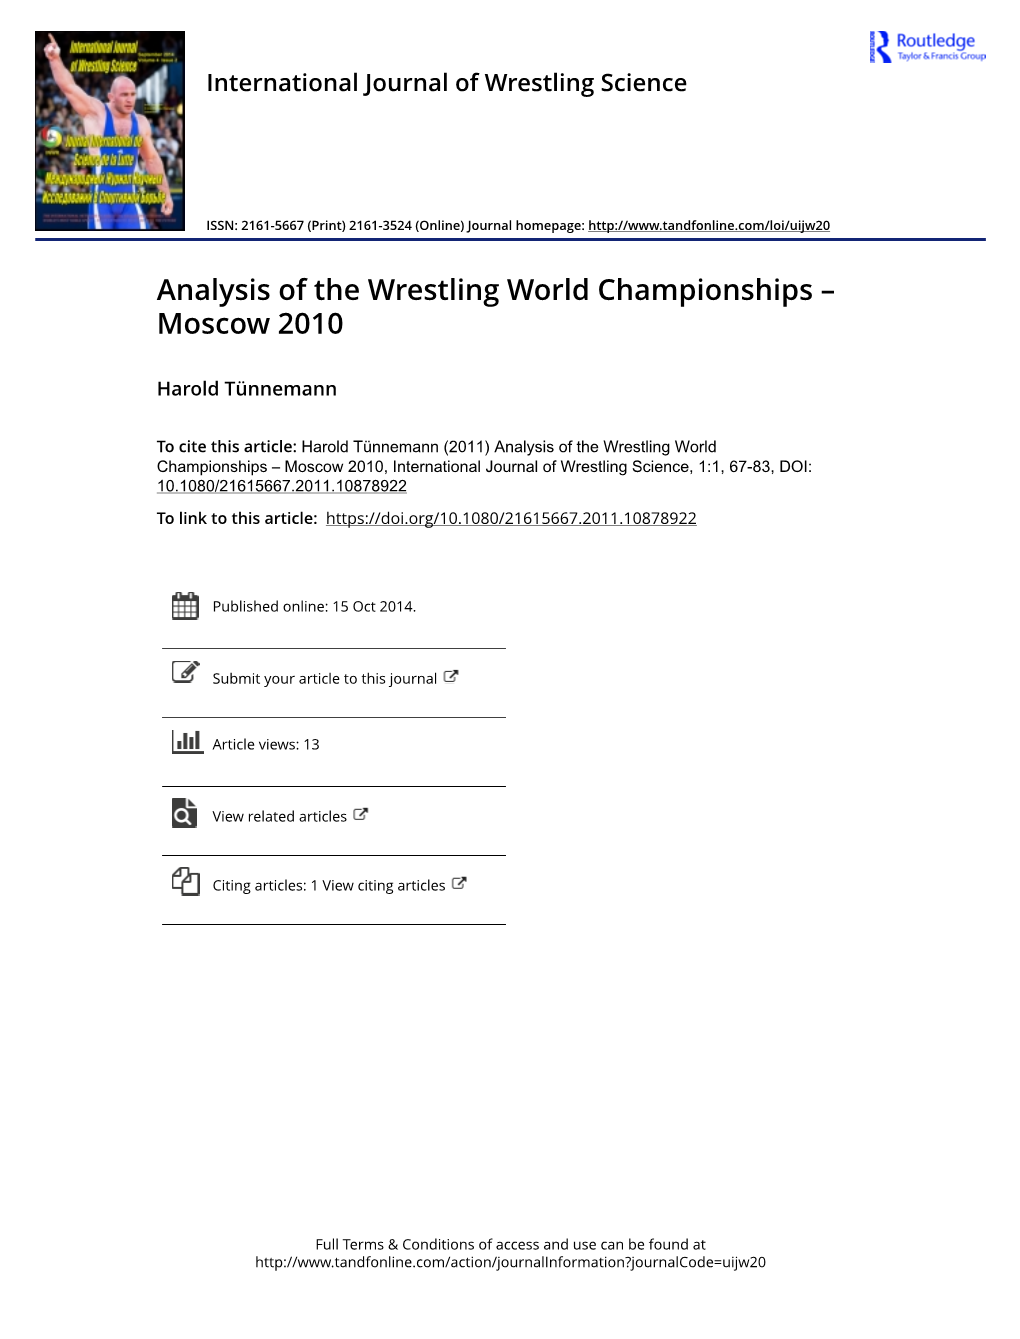 Analysis of the Wrestling World Championships – Moscow 2010